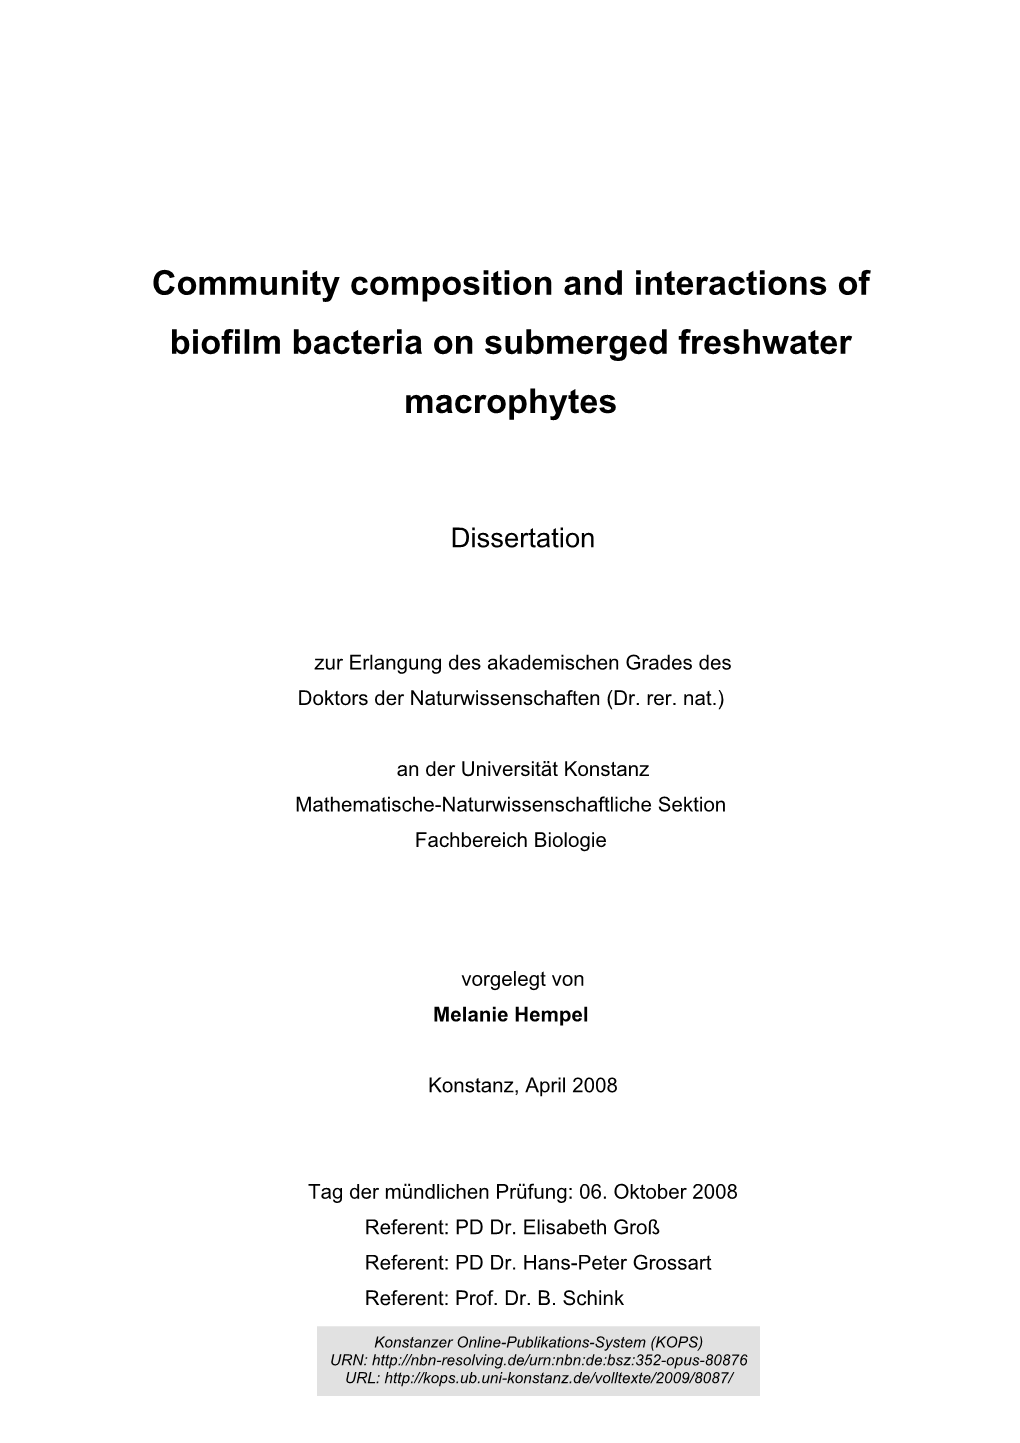 Community Composition and Interactions of Biofilm Bacteria on Submerged Freshwater Macrophytes